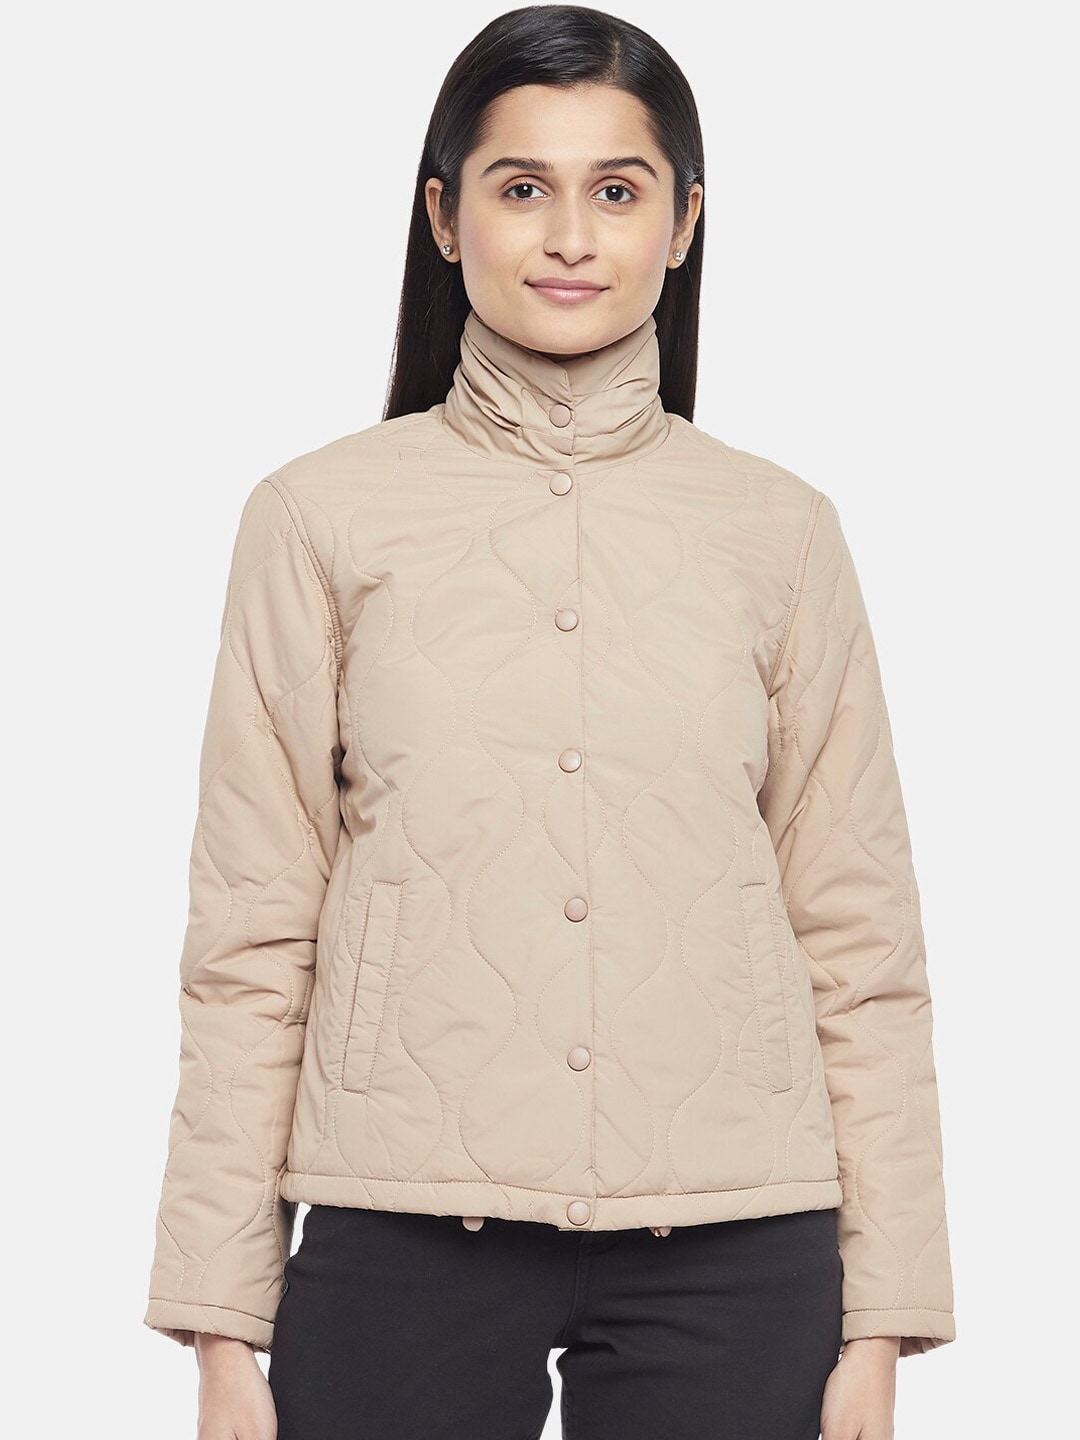 Honey by Pantaloons Women Beige Quilted Jacket Price in India